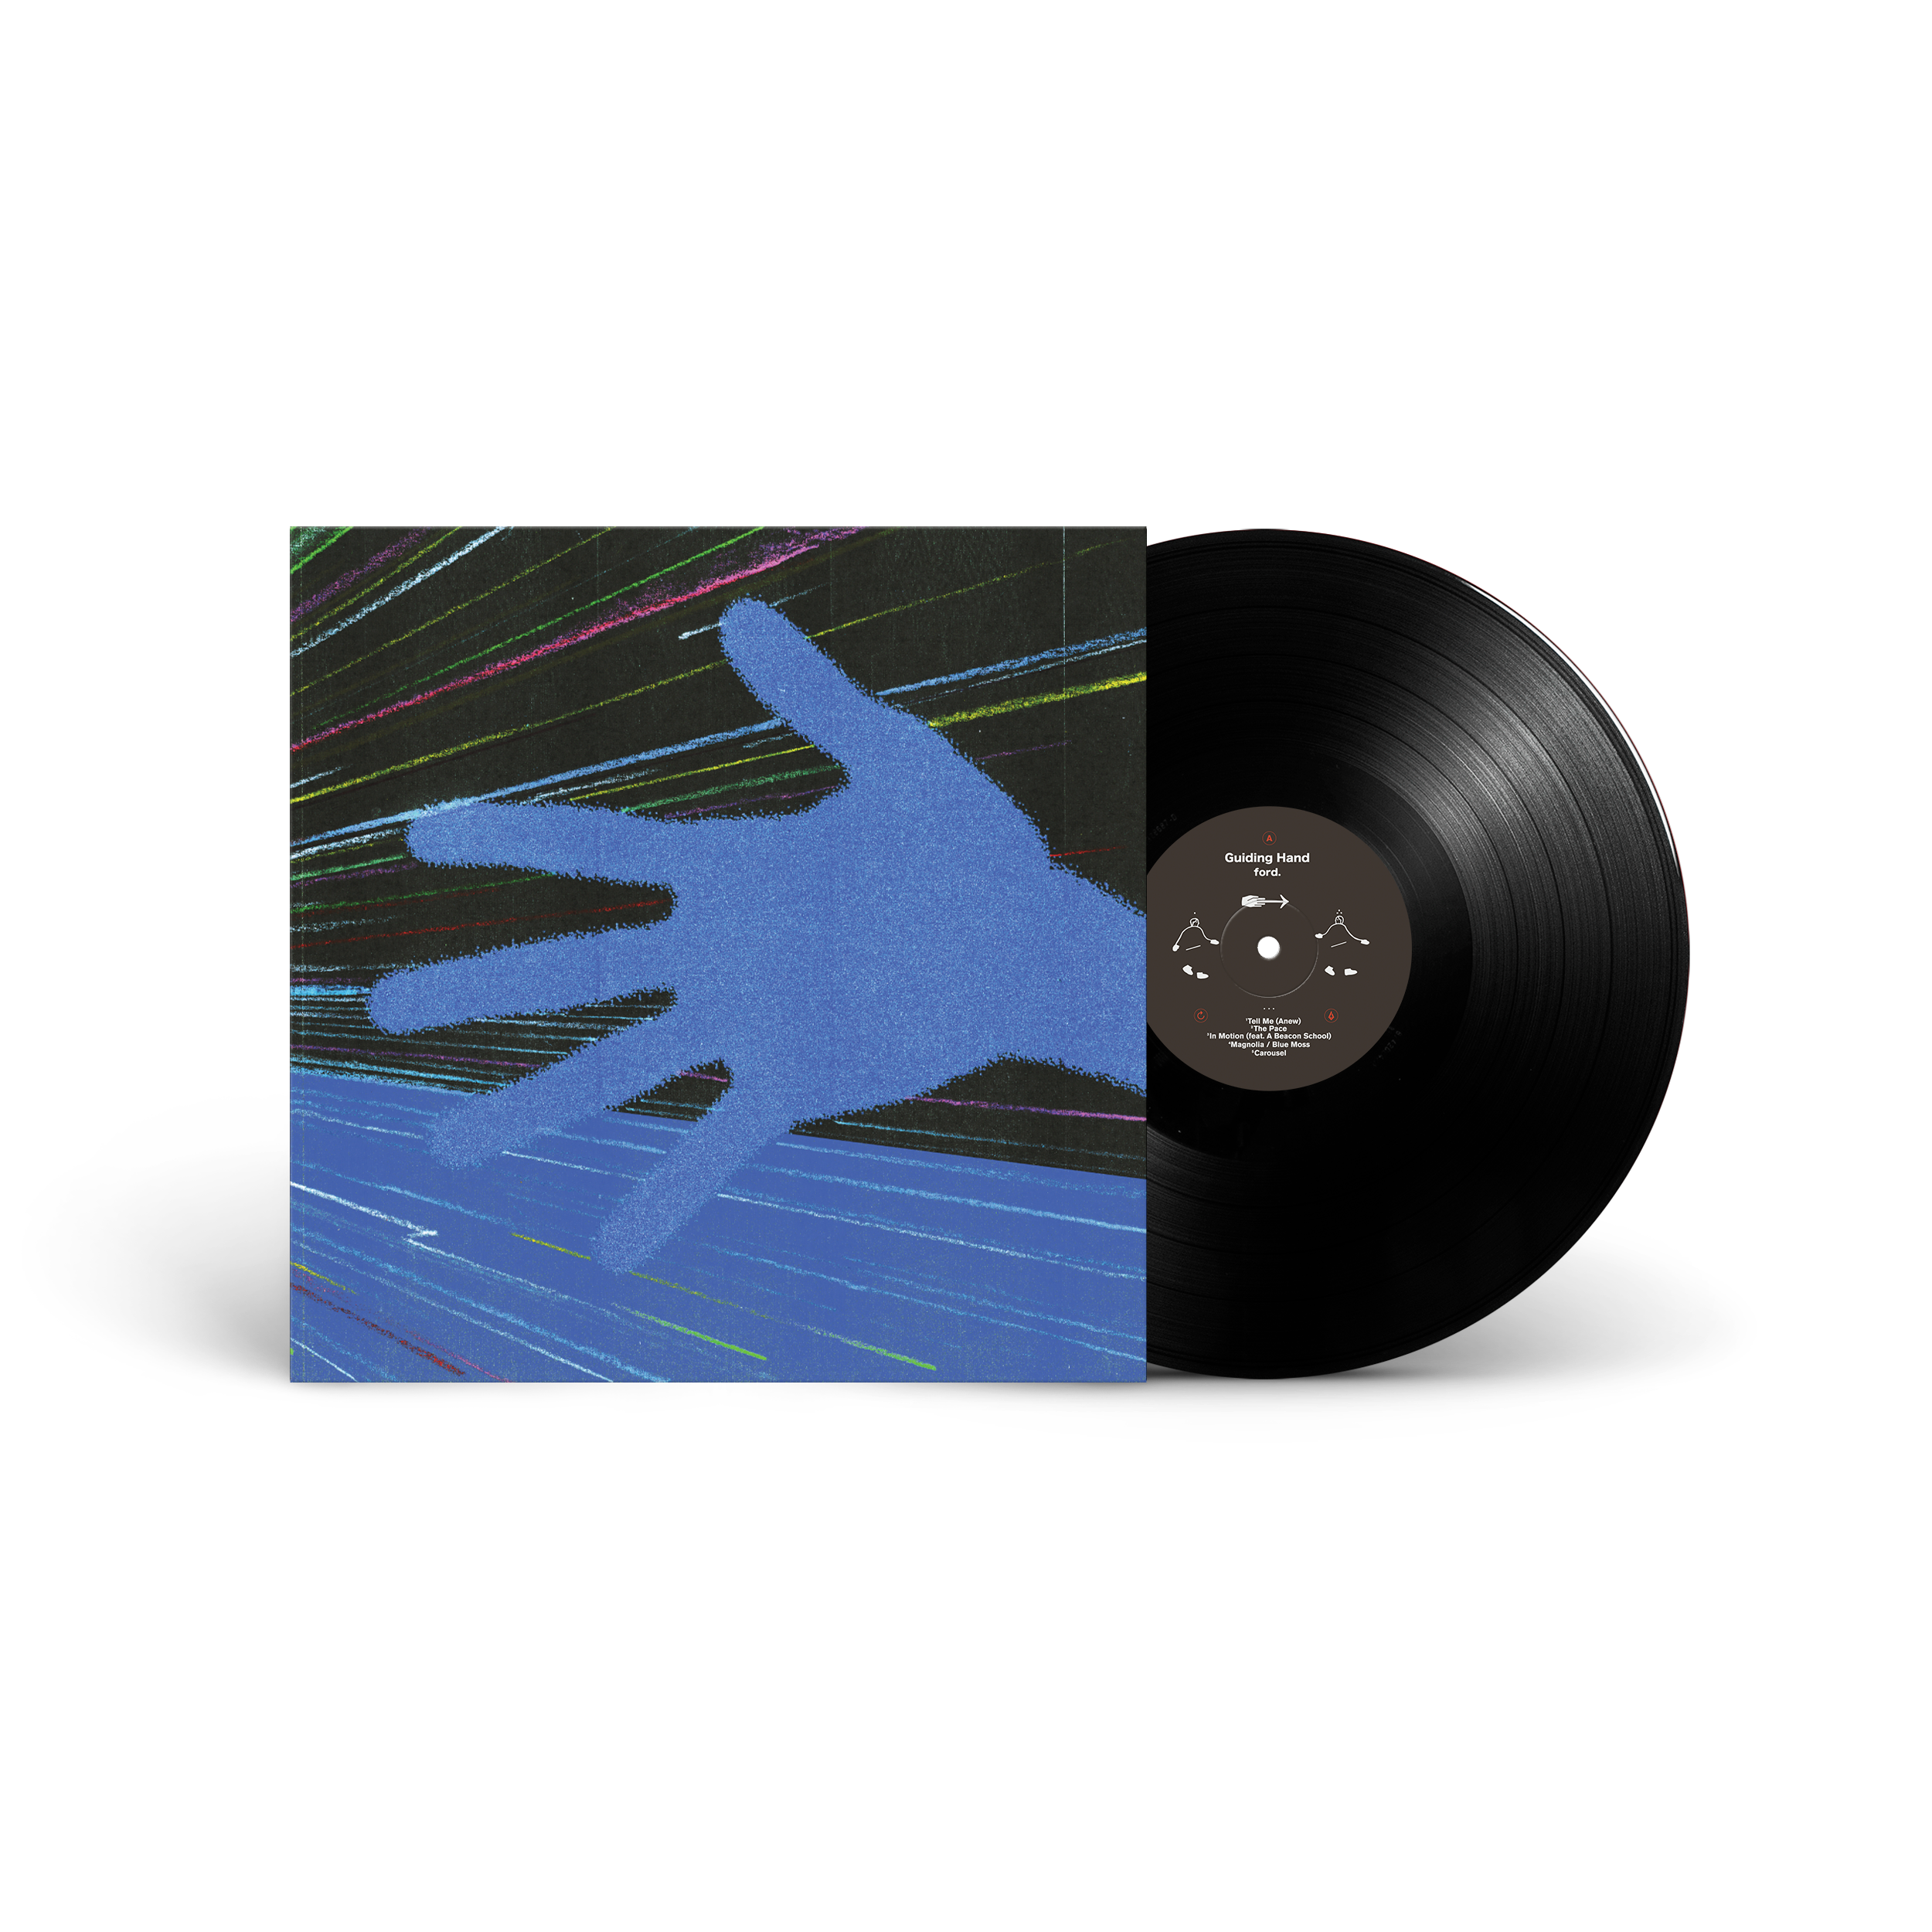 ford. - Guiding Hand LP + Digital Album Front Background